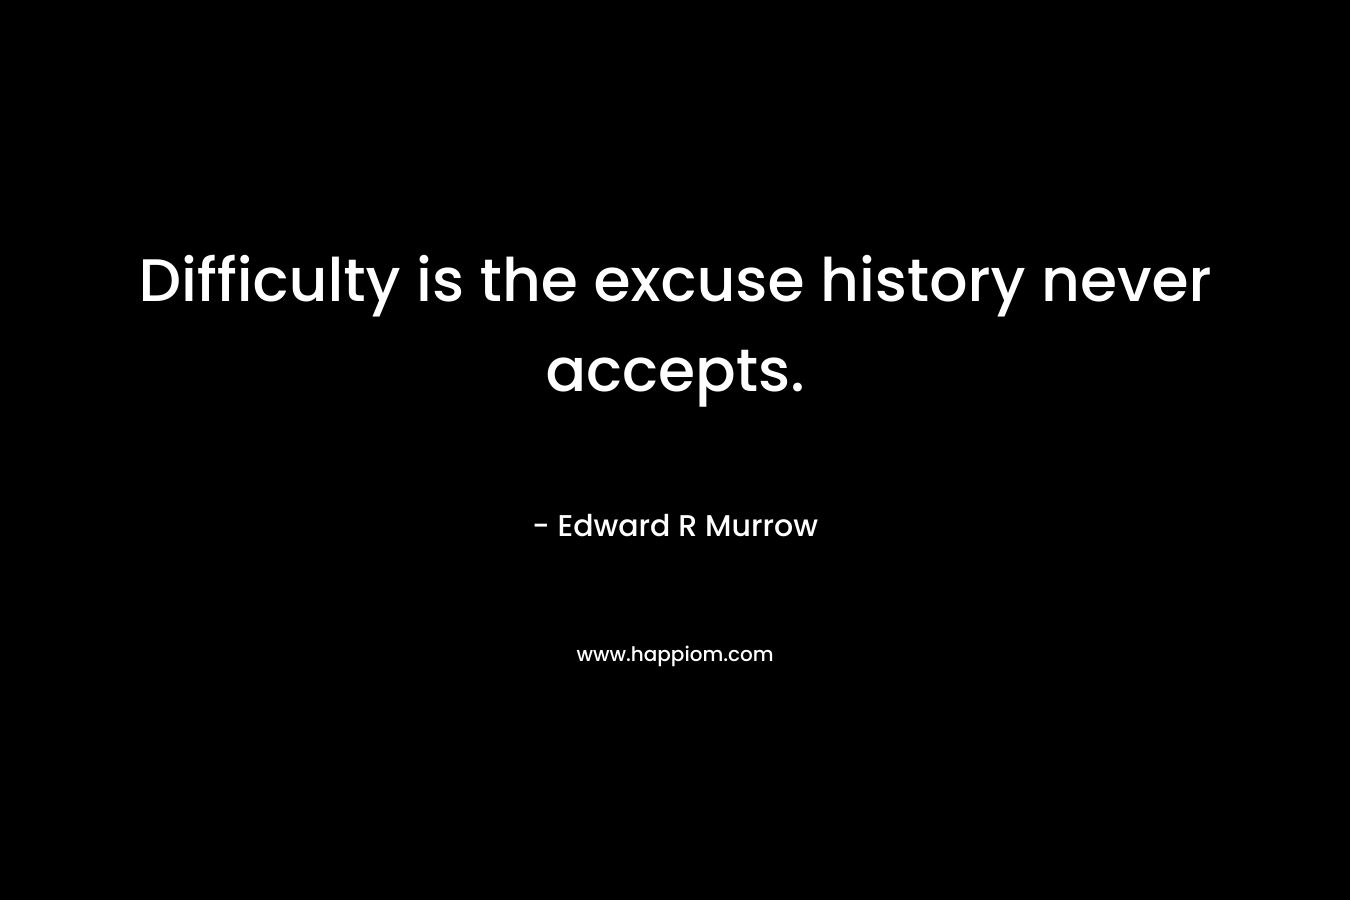 Difficulty is the excuse history never accepts. – Edward R Murrow